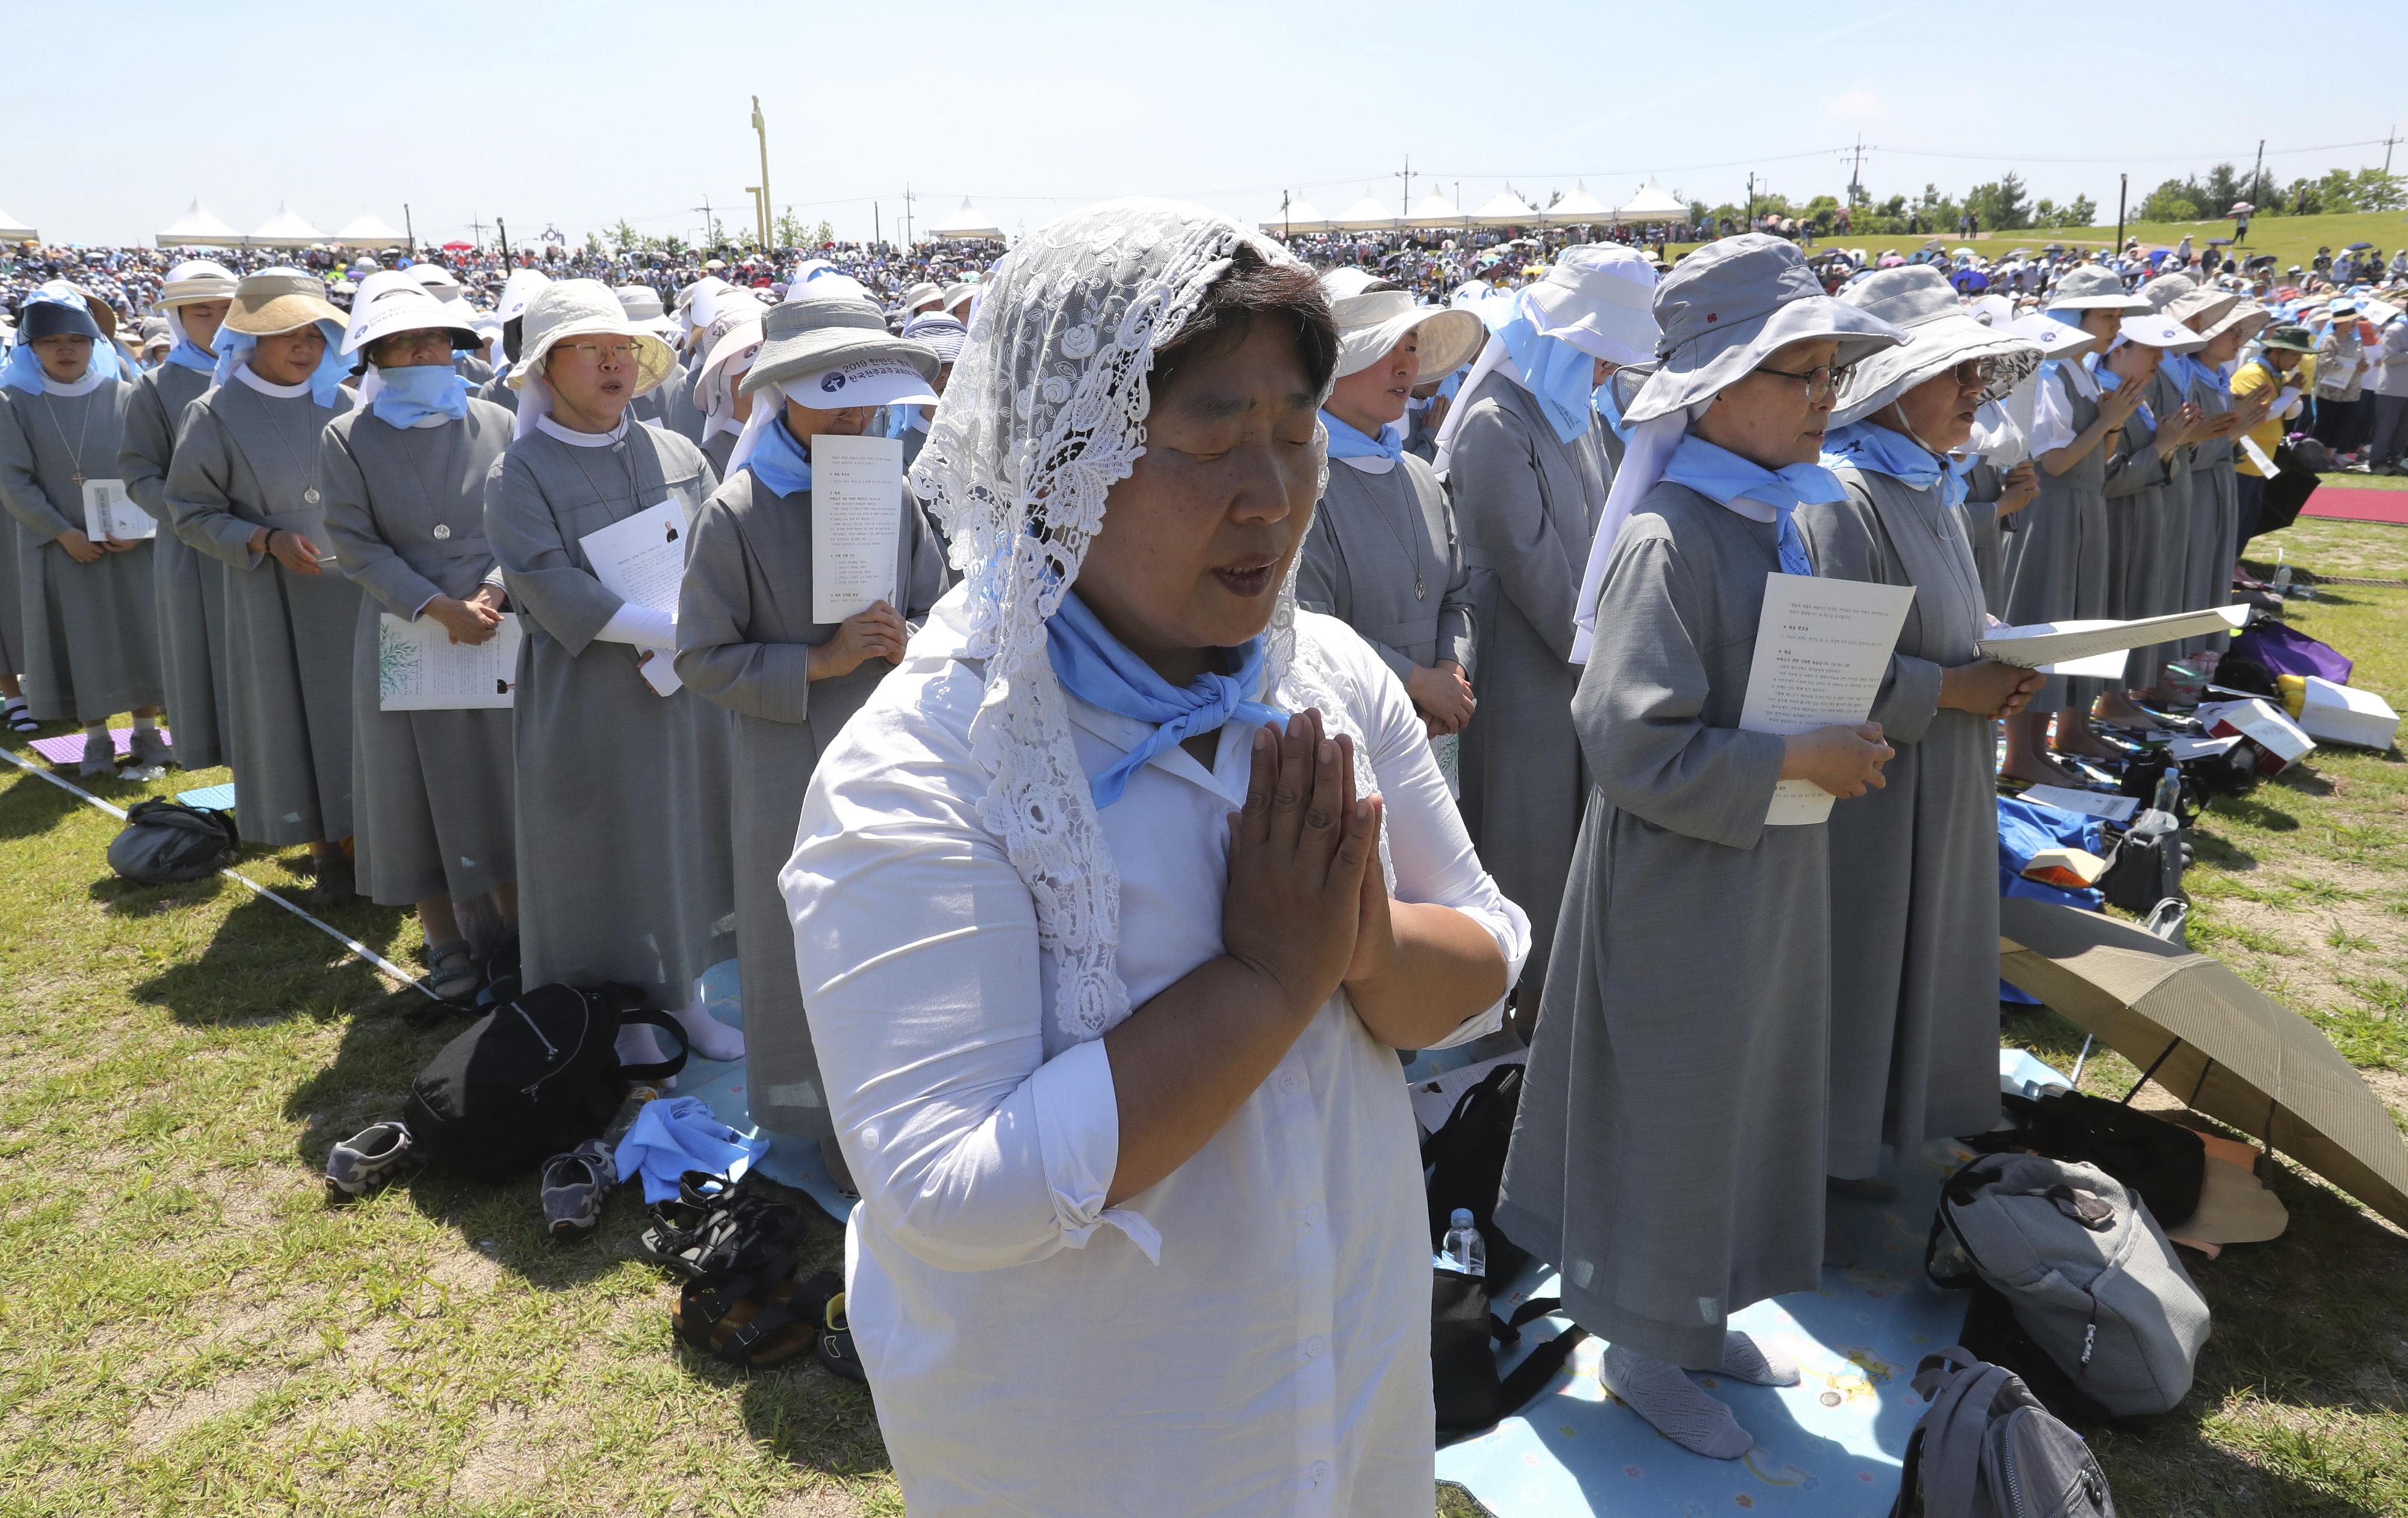 A South Korean Catholic believer prays wishing for peace on the Korean Peninsula during a service to mark the 69th anniversary of the outbreak of the Korean War at the Imjingak Pavilion, near the demilitarized zone of Panmunjom, in Paju, South Korea, Tuesday, June 25, 2019. South Korea and North Korea fought a devastating three-year war in the early 1950s that ended with an armistice, not a peace treaty. (AP Photo/Ahn Young-joon)